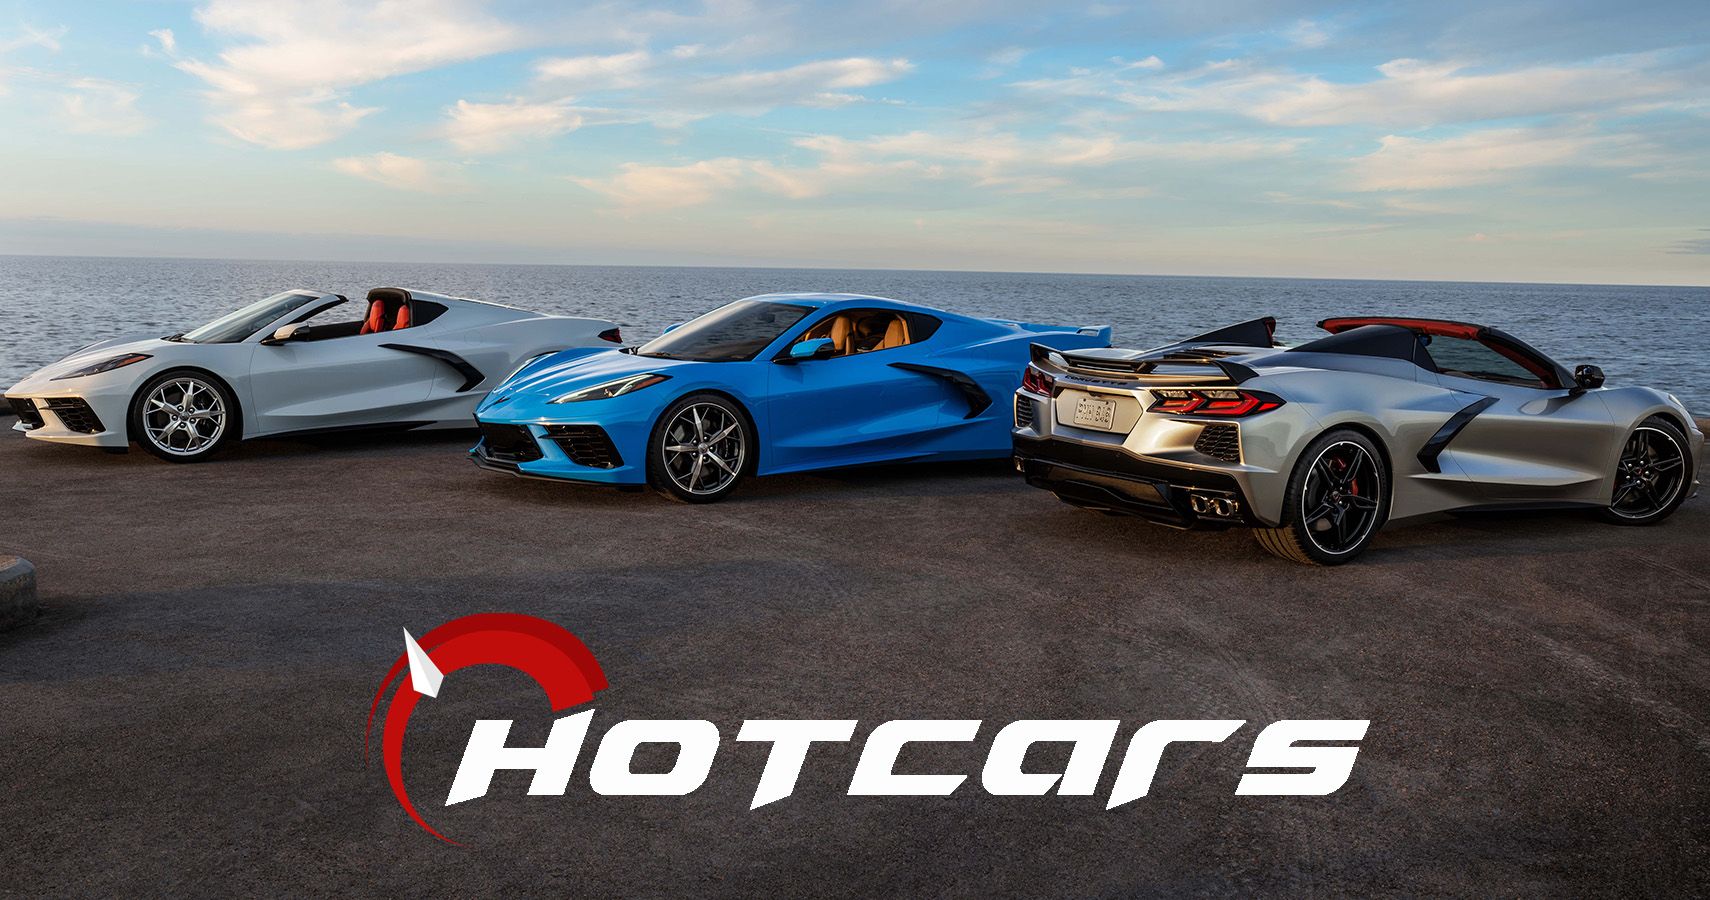 C8 Corvette American Sports Car Of The Year